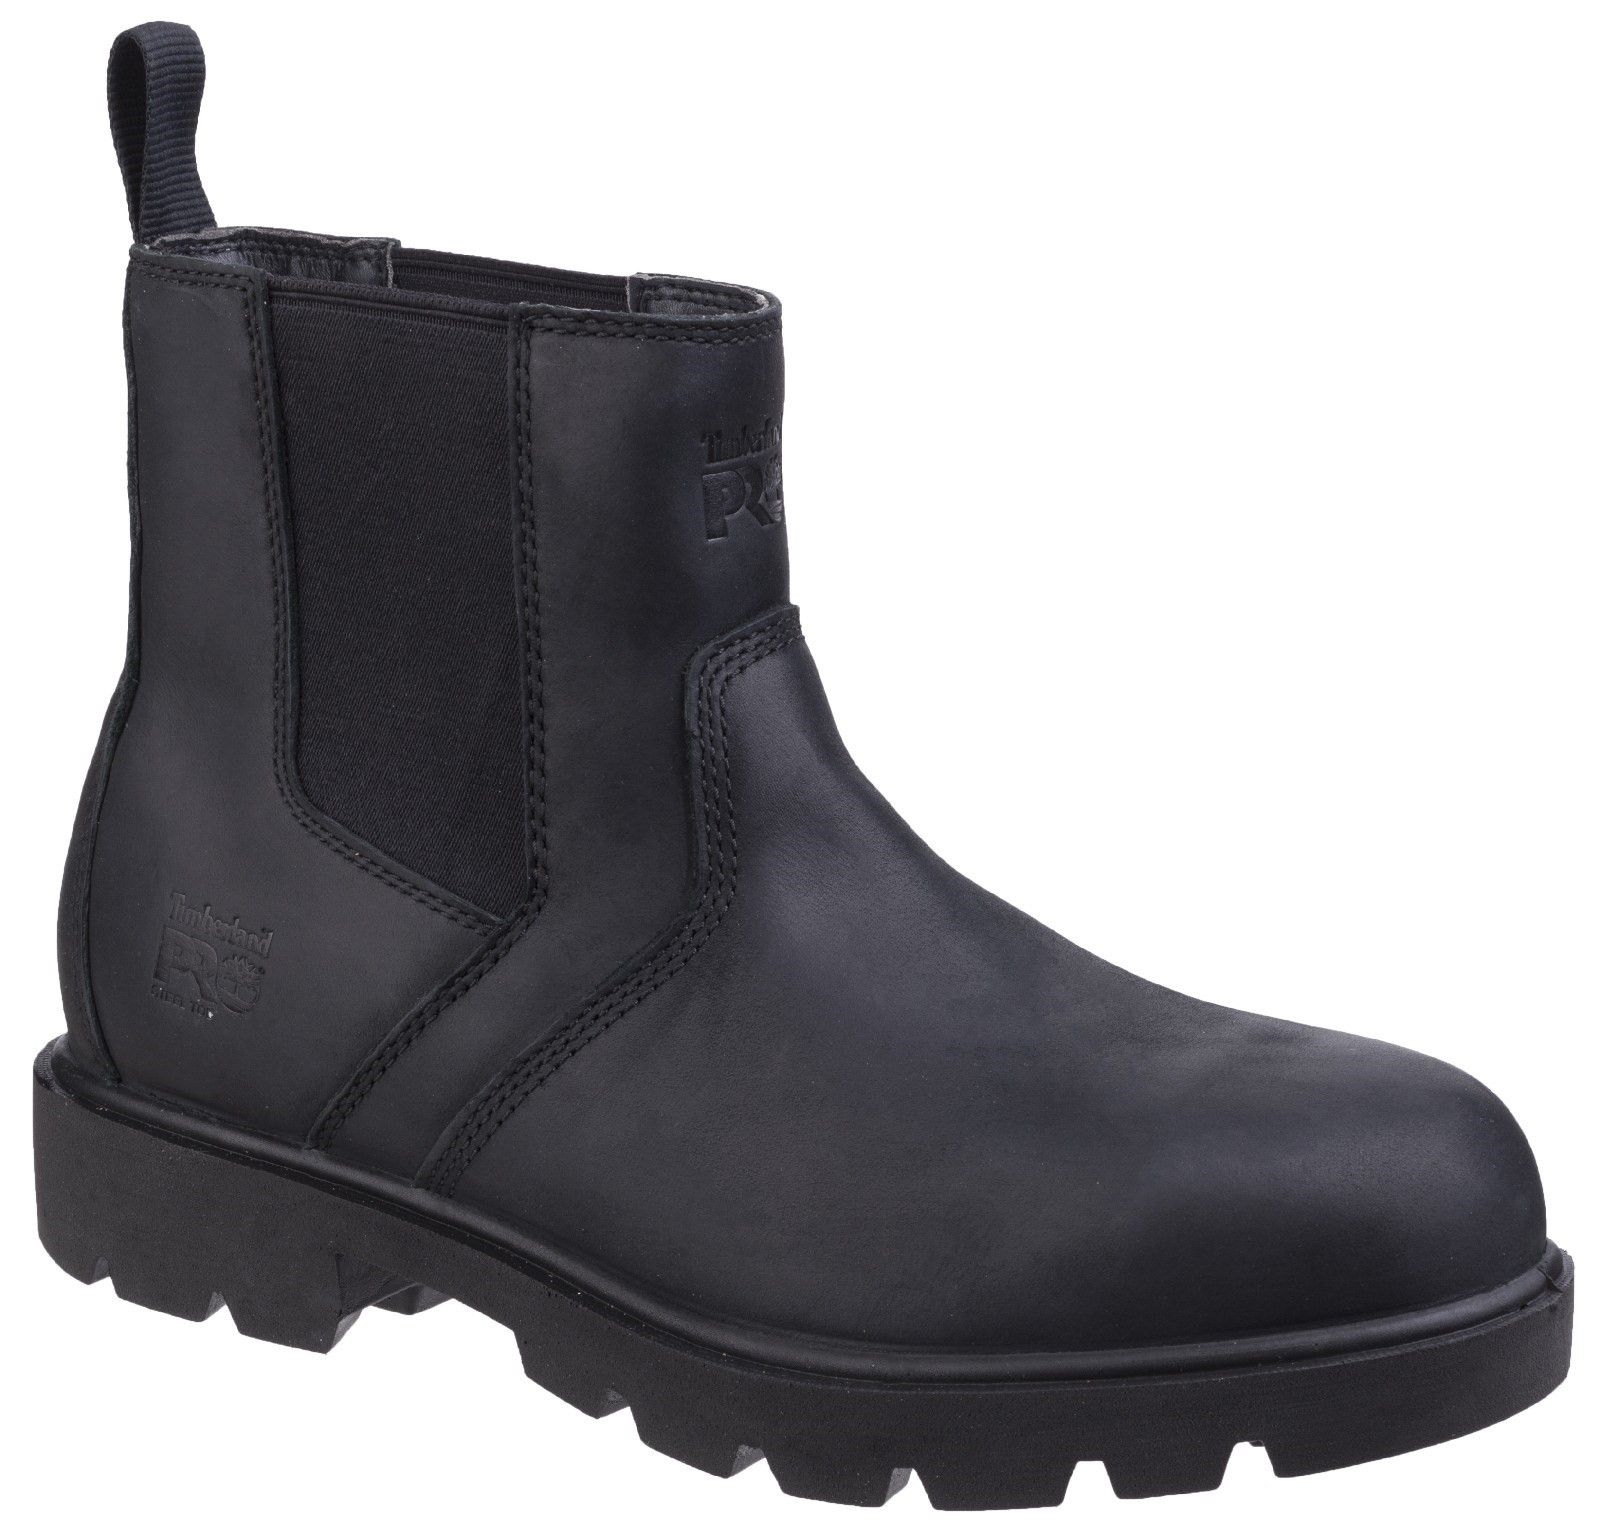 Timberland Sawhorse Dealer boot with impact and compression resistant toe cap, comfort and durabilityMens premium full grain leather Chelsea. 
Slip resistant wide tread lug outsole. 
Single Density Open Cell Polyurethane footbed. 
Mesh lining for added breathability and comfort.. 
Steel Toe.